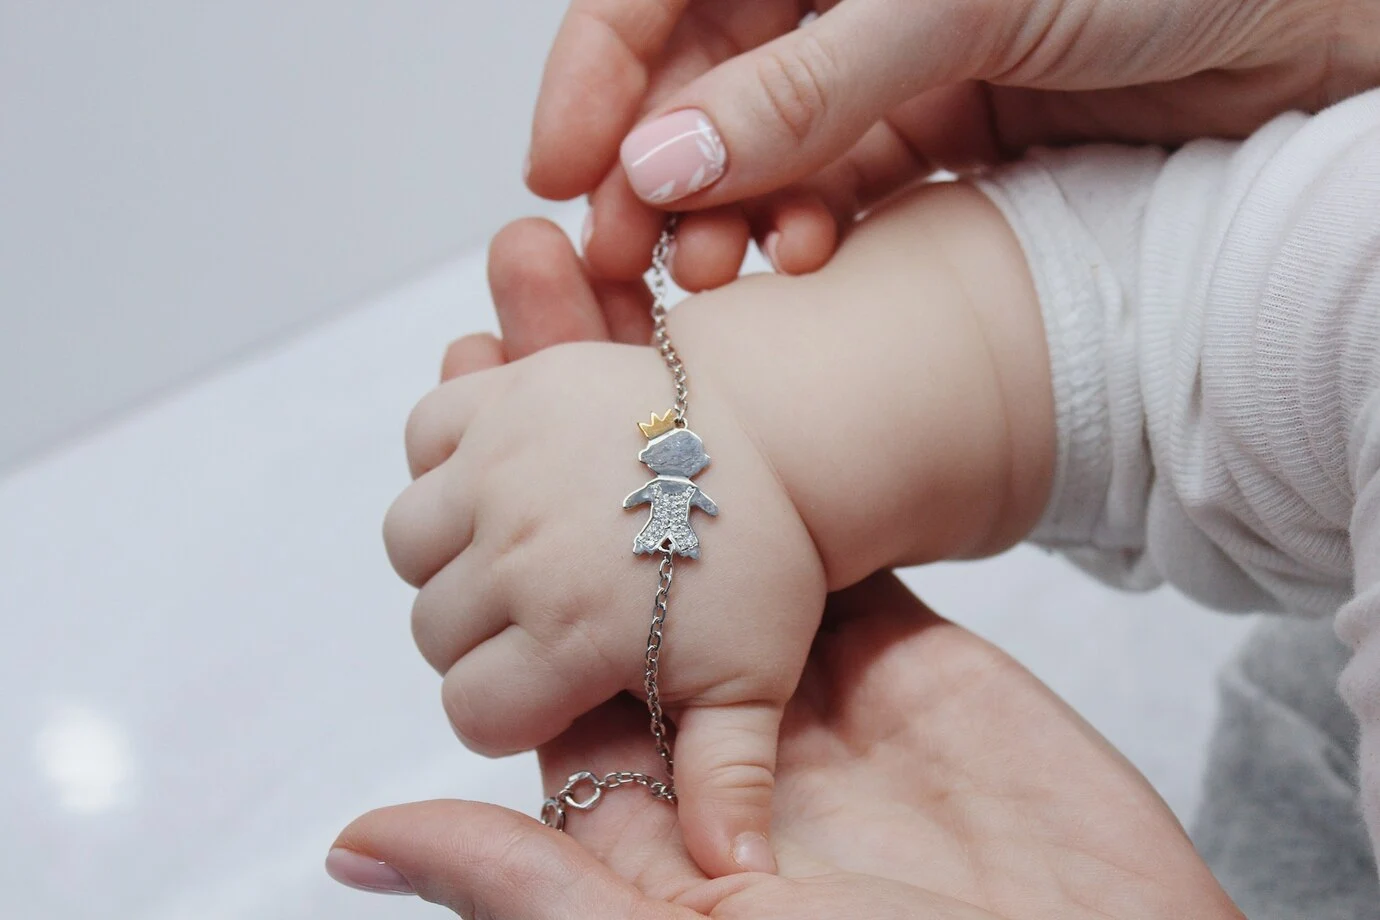 Woman holding baby's hand with silver bracelet